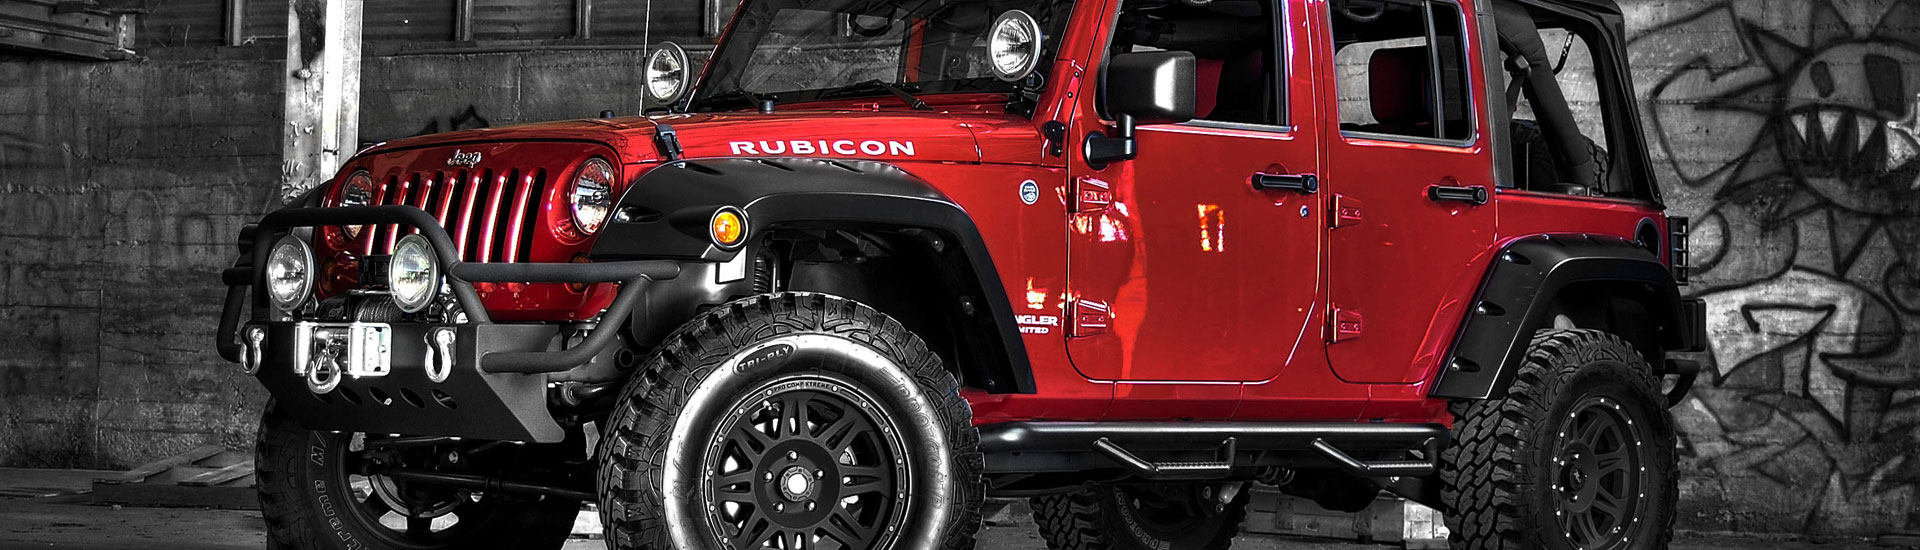 Jeep Wraps | Find Wraps For Jeep Wrangler, Cherokee & More